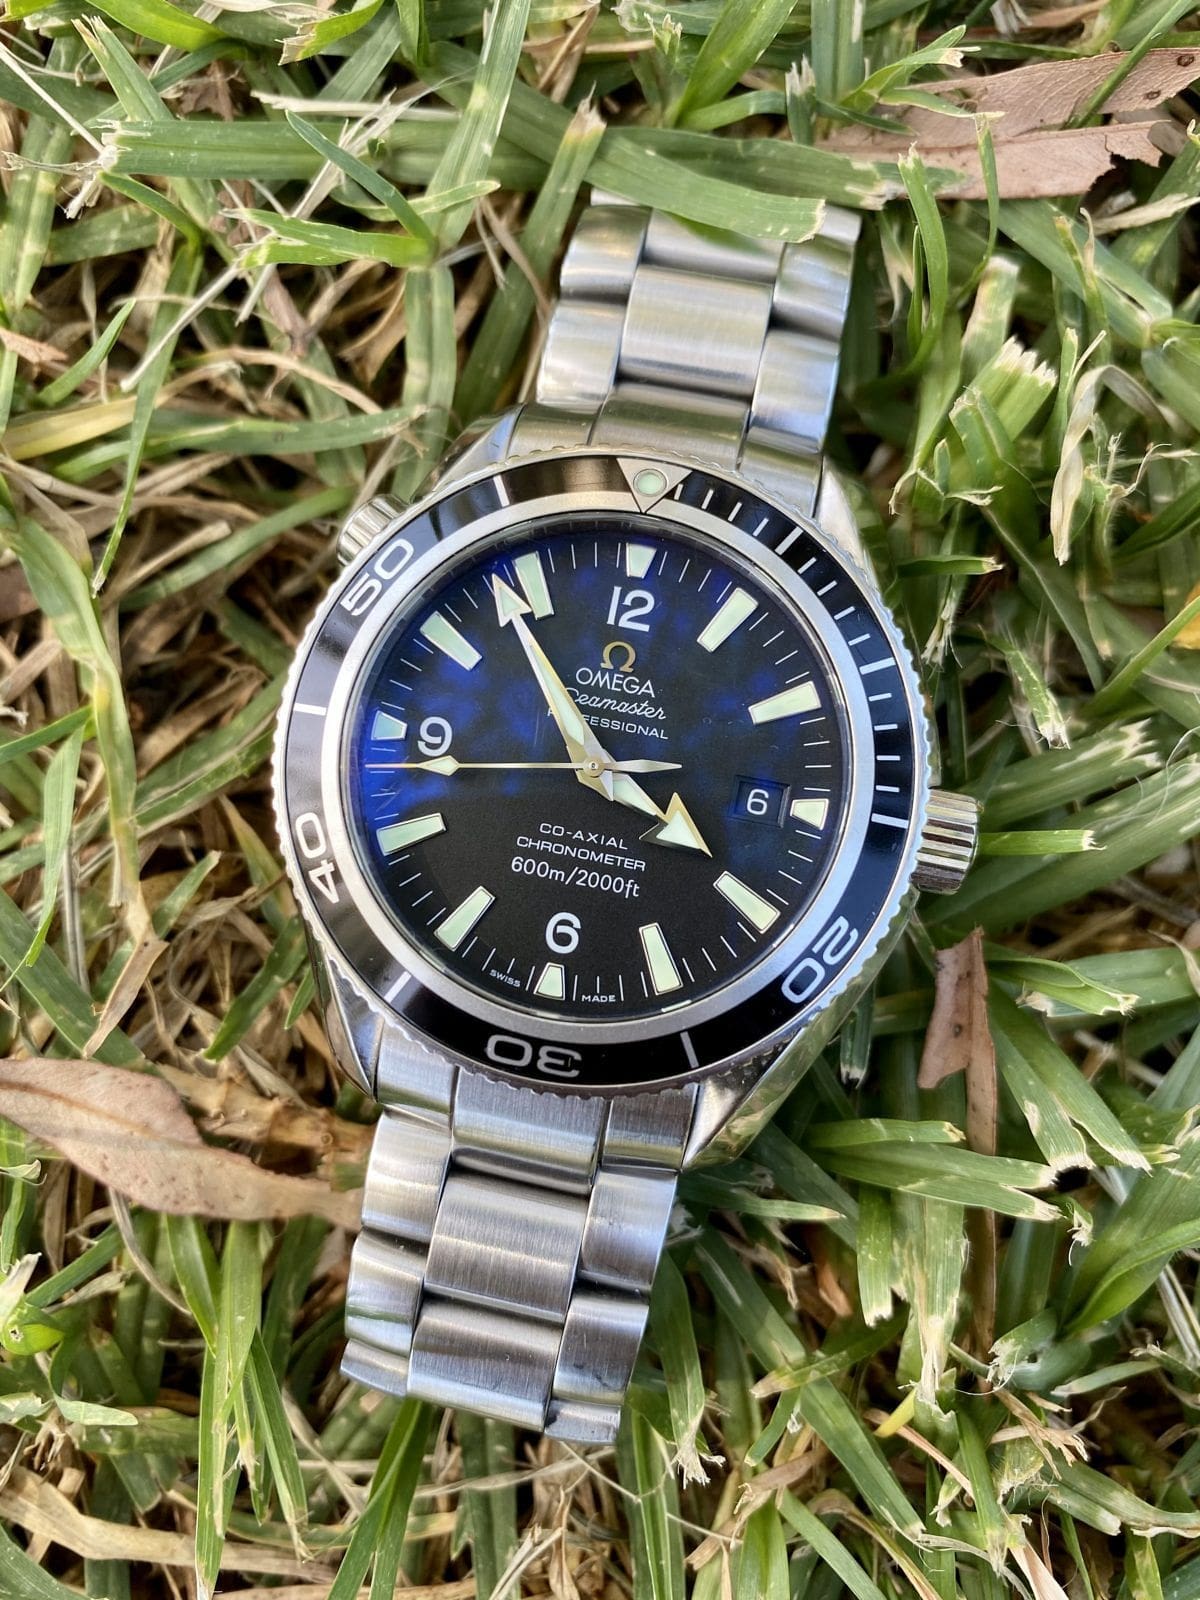 Why I sold my favourite watch – the 2008 Omega Seamaster Planet Ocean 42mm